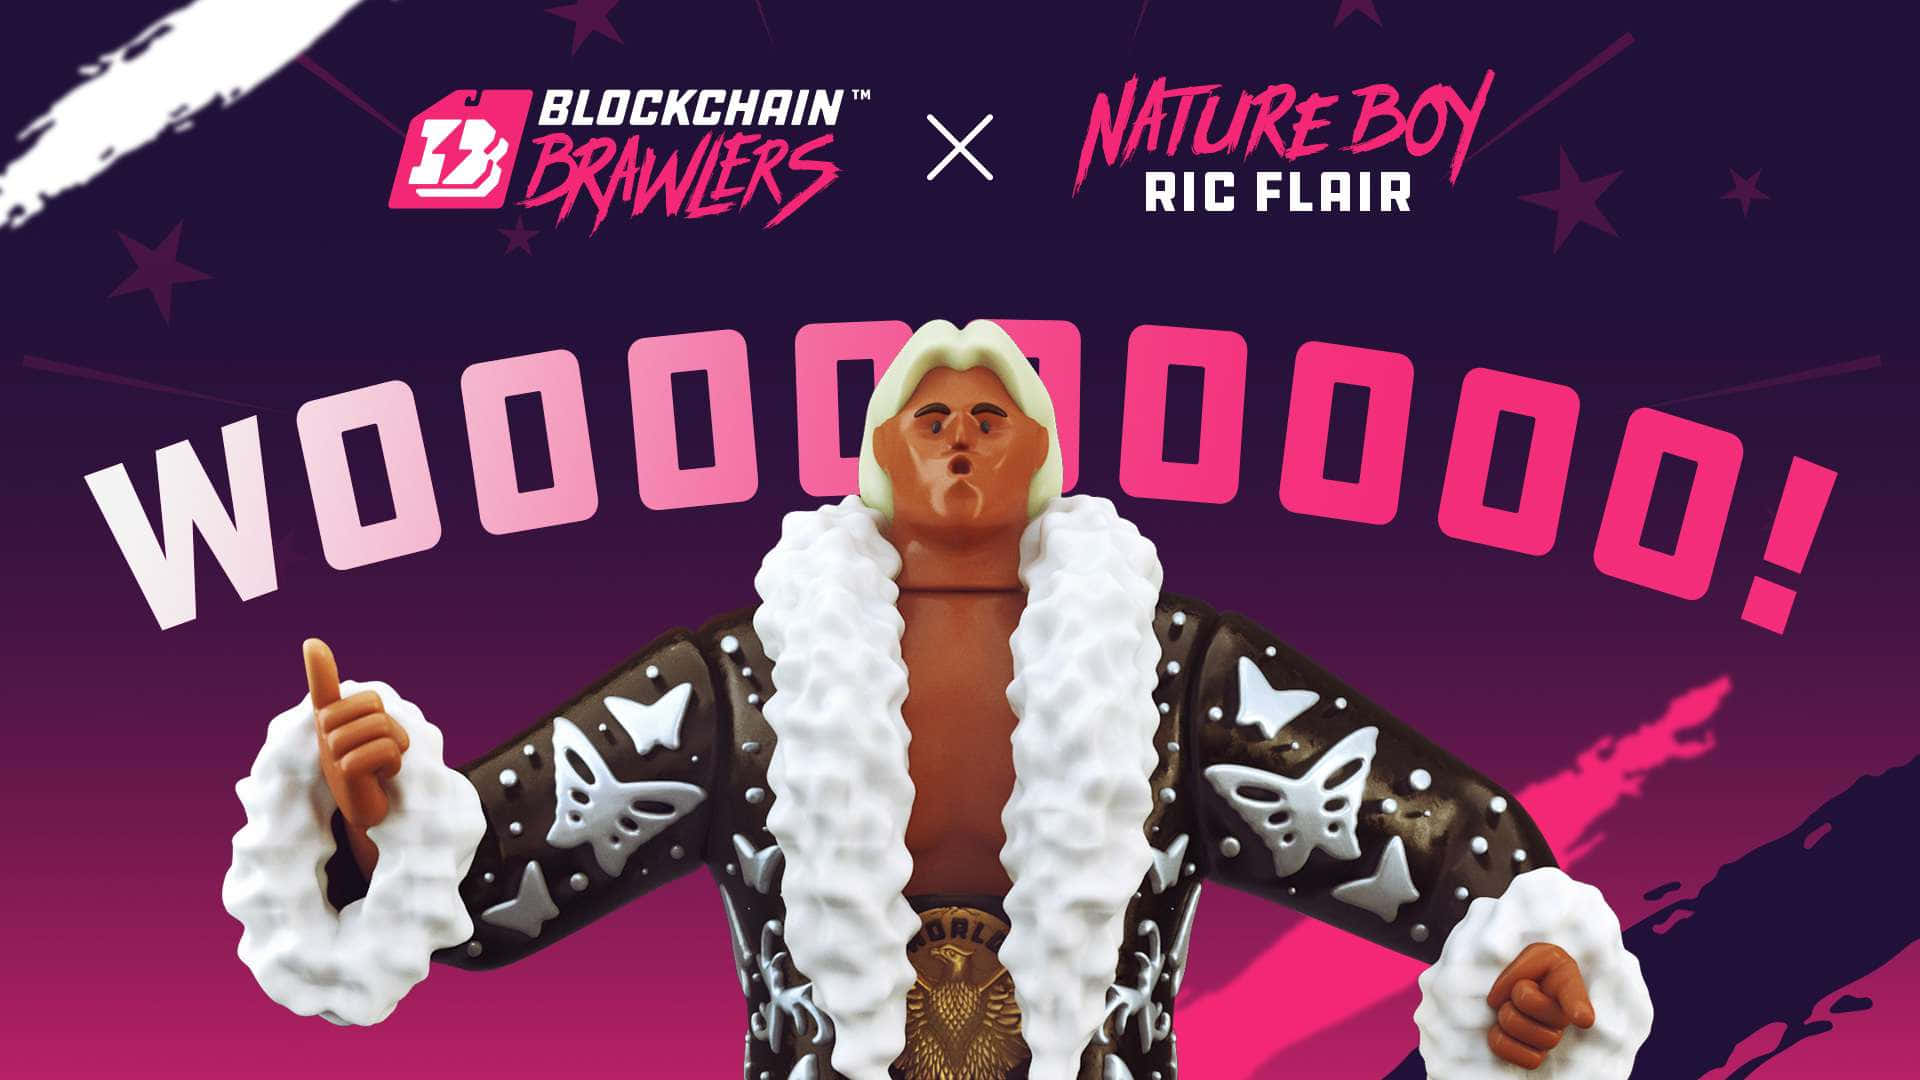 Ric Flair For Blockchain Brawlers Nft Game Background